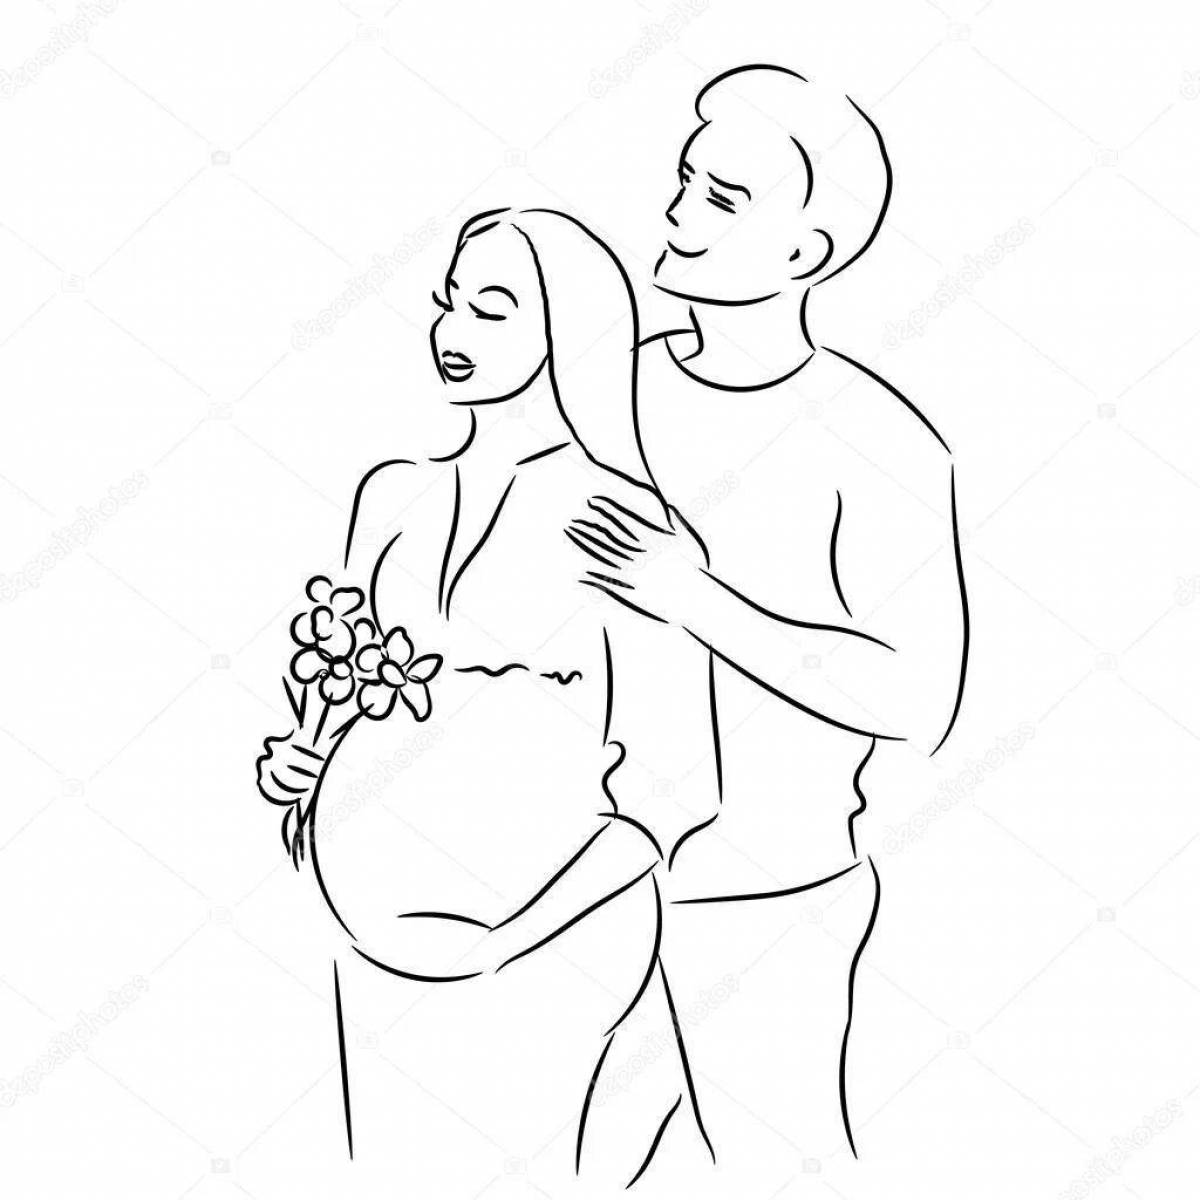 Coloring book exalted pregnant girl